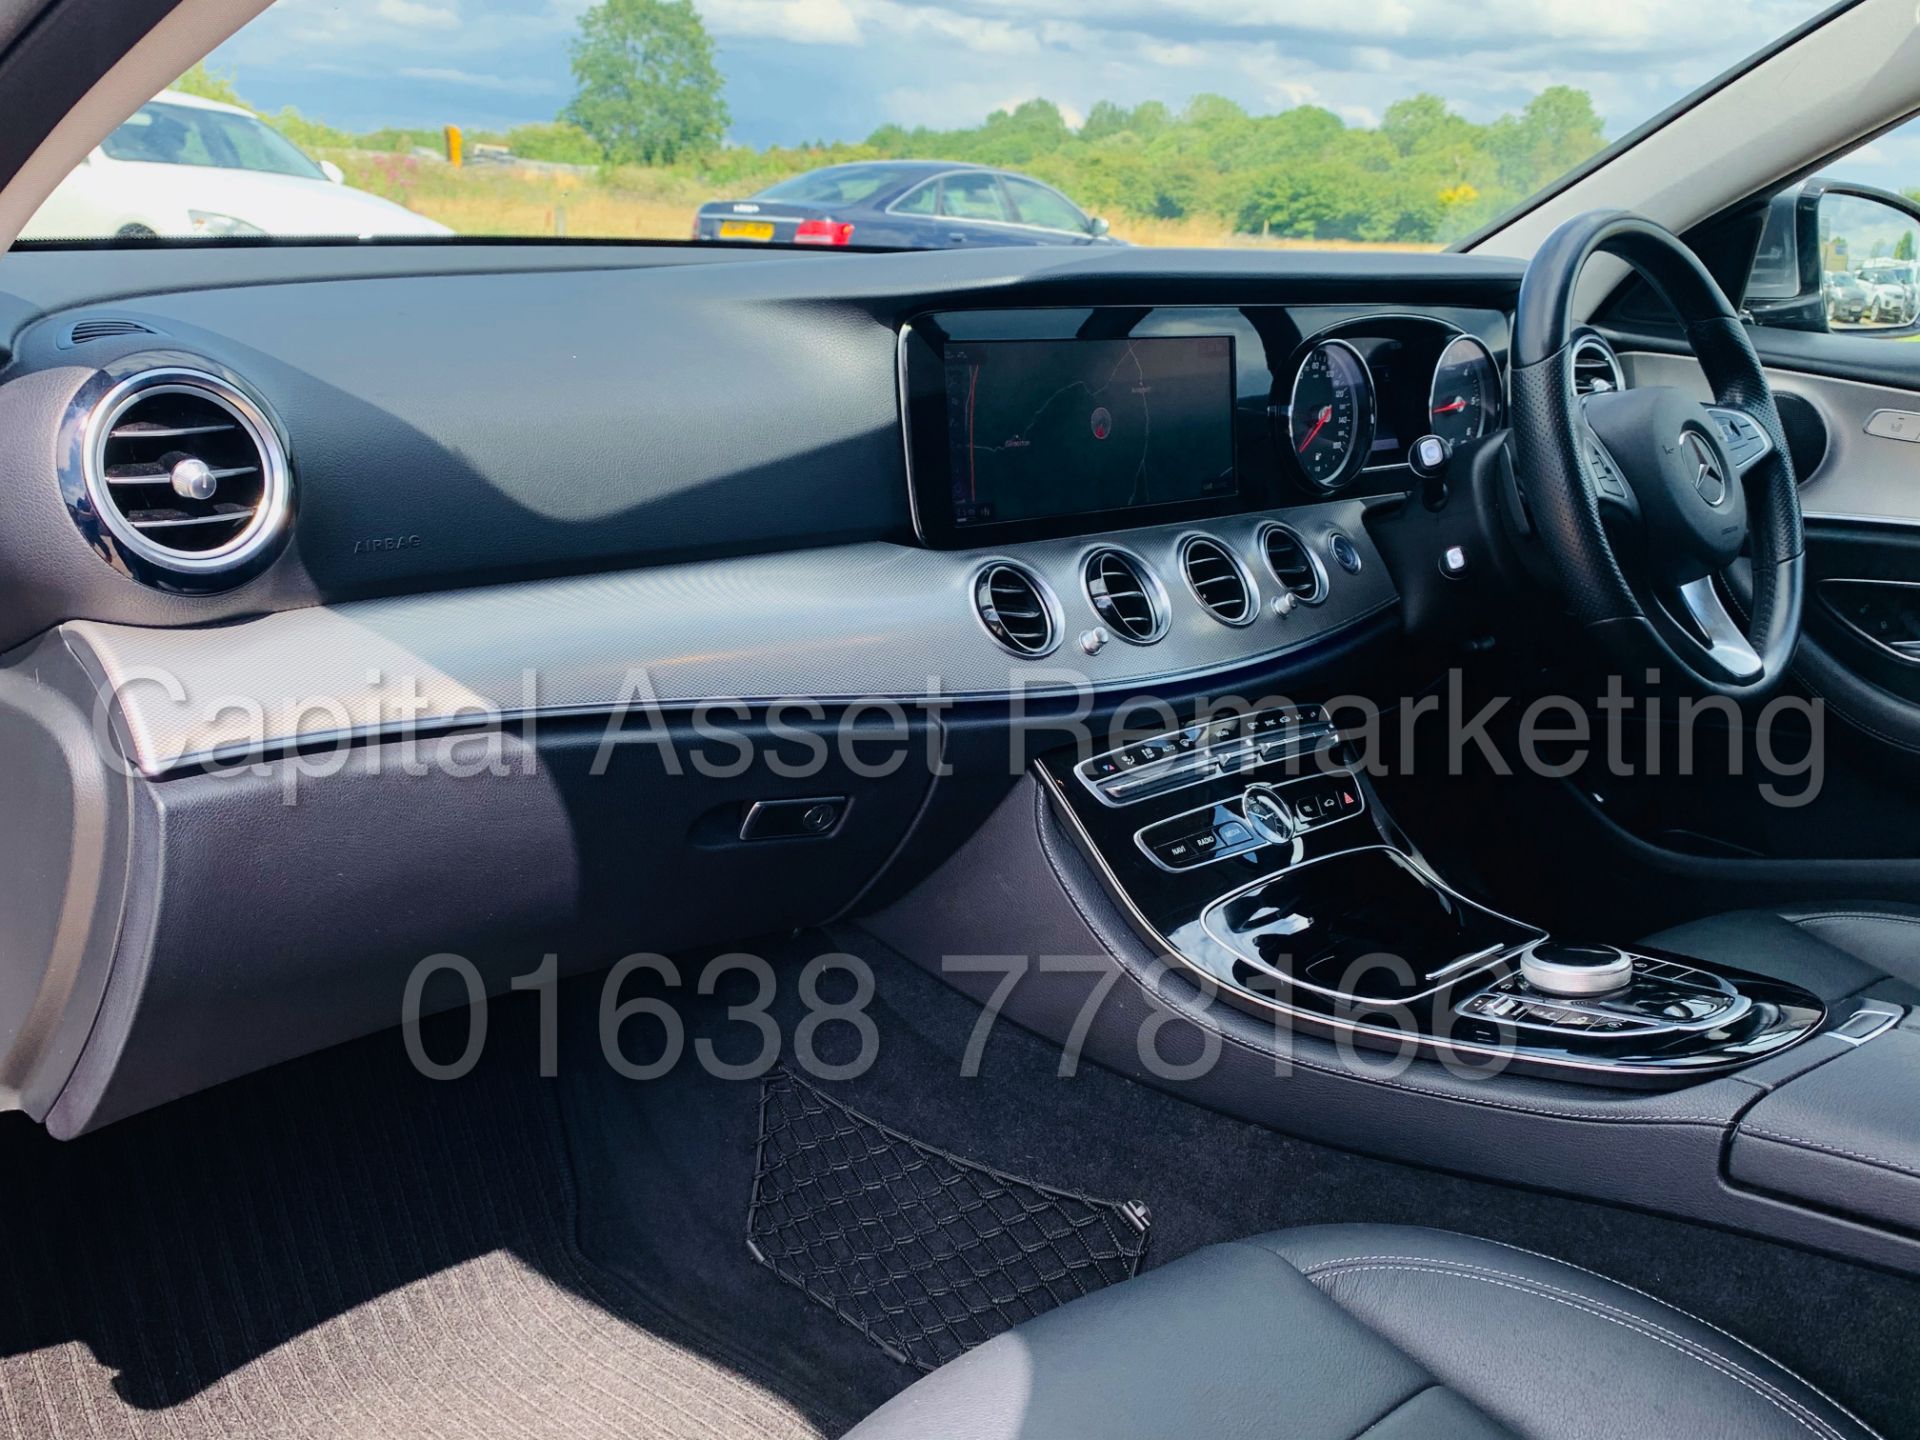 (On Sale) MERCEDES-BENZ E220D *SALOON* (2018 - NEW MODEL) '9-G TRONIC AUTO - LEATHER - SAT NAV' - Image 22 of 56